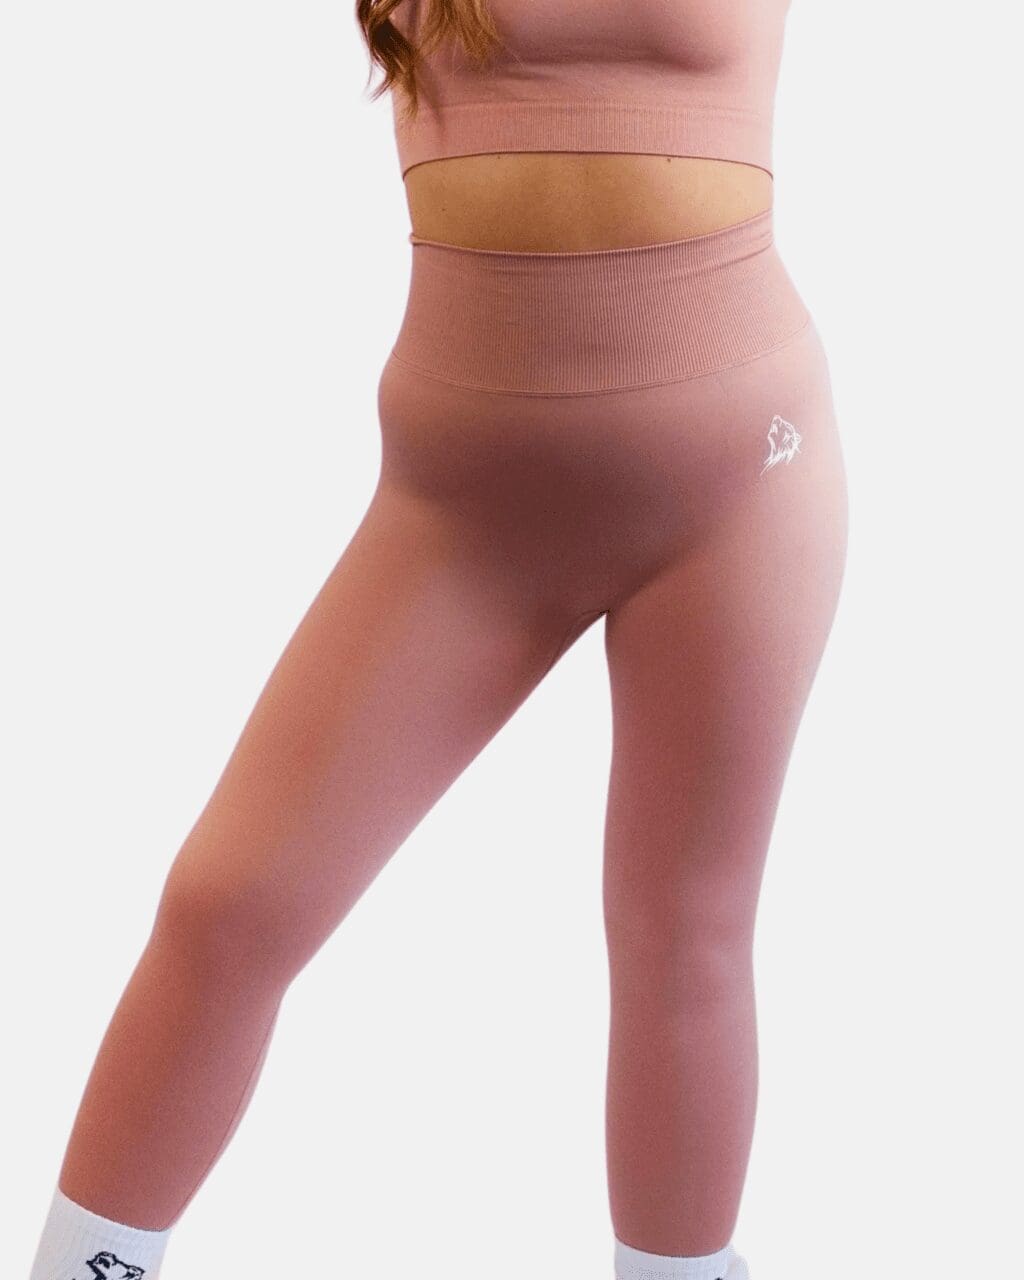 A woman wearing pink leggings and a bra